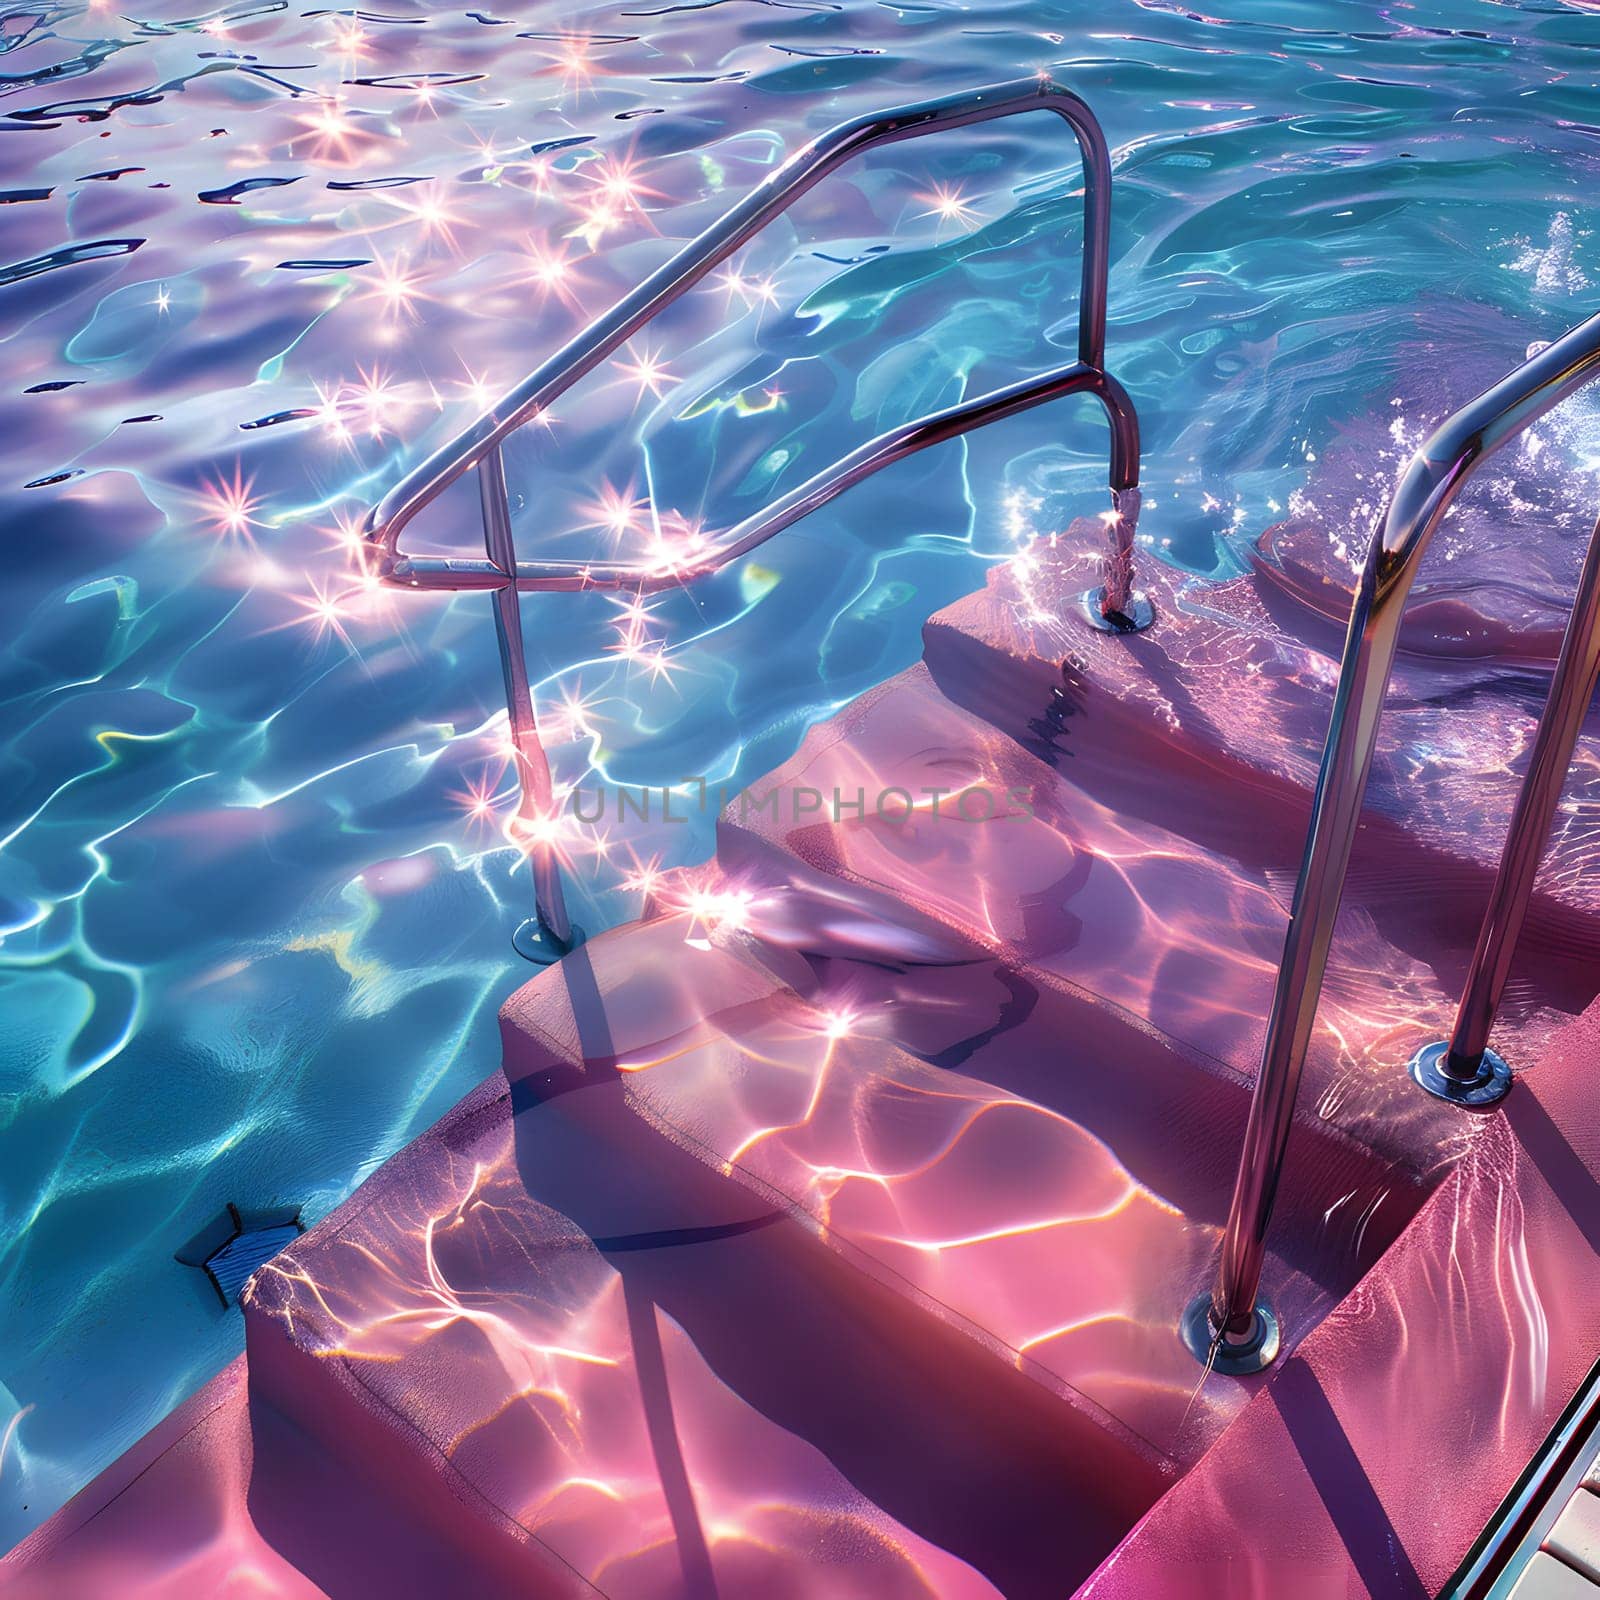 A pink staircase descends into the azure water of the swimming pool by Nadtochiy